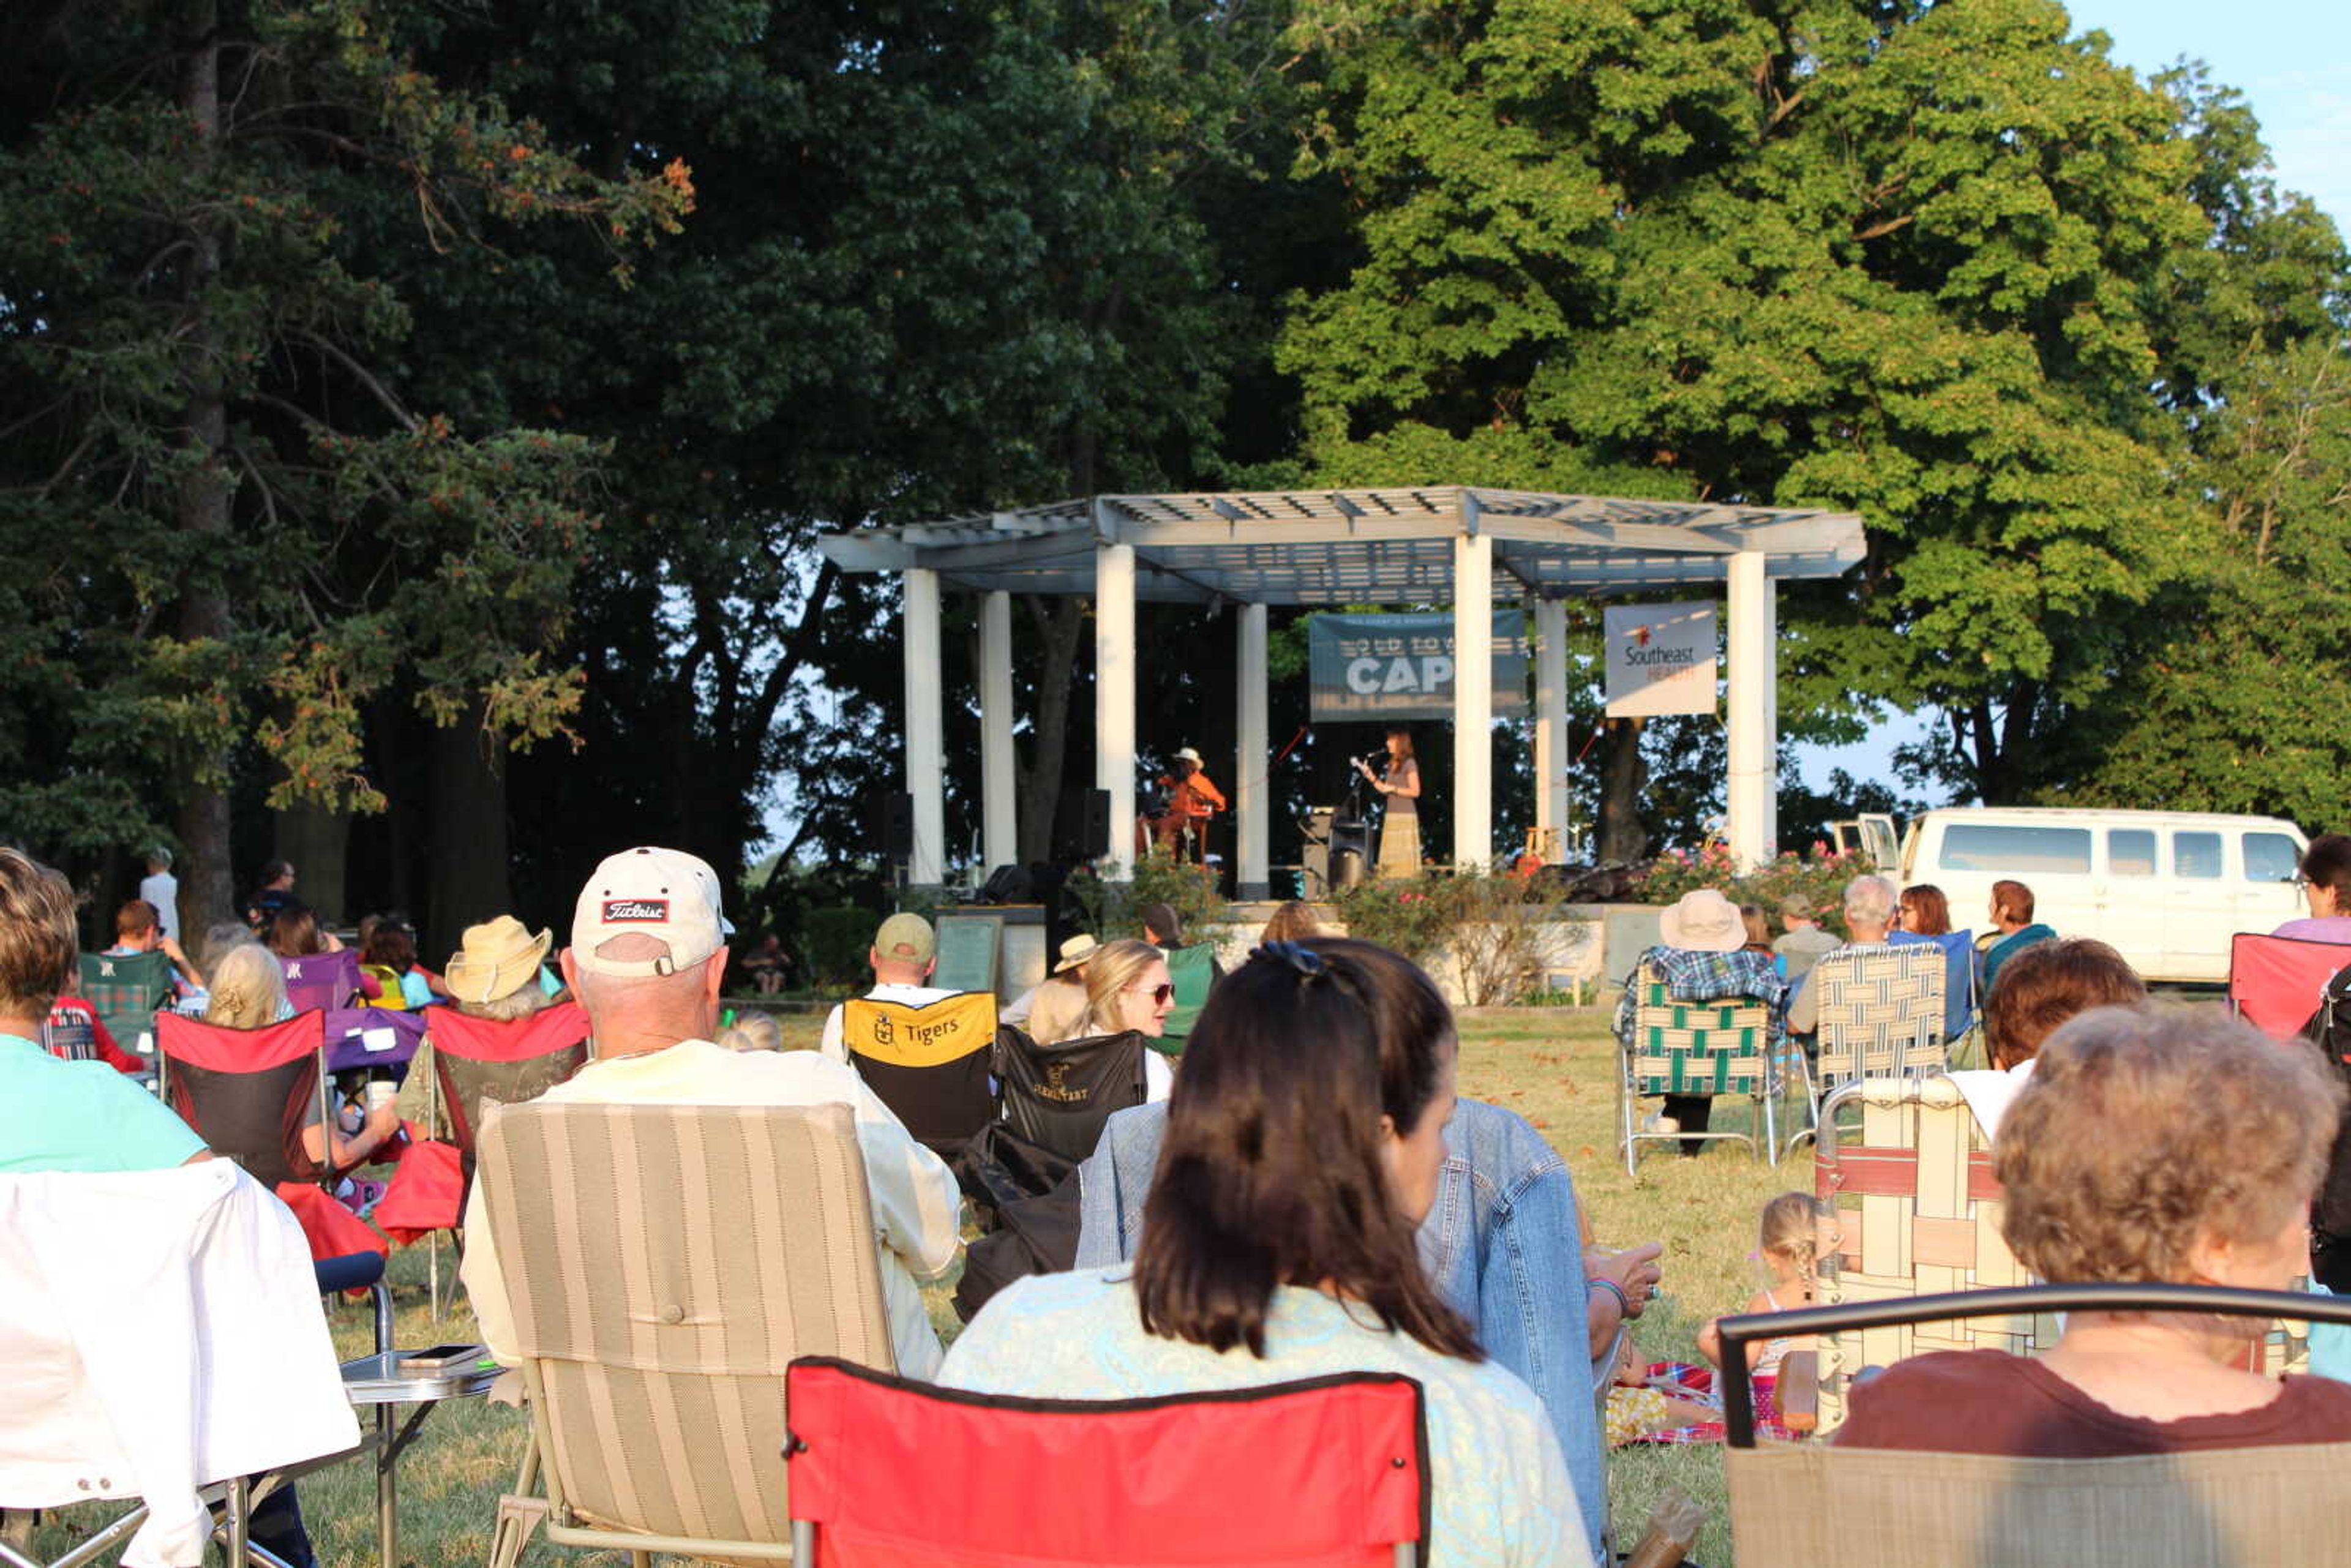 The Gazebo, pictured at Tunes at Twilight on Sept. 1, will be receiving a roof renovation with the funds from the grant.